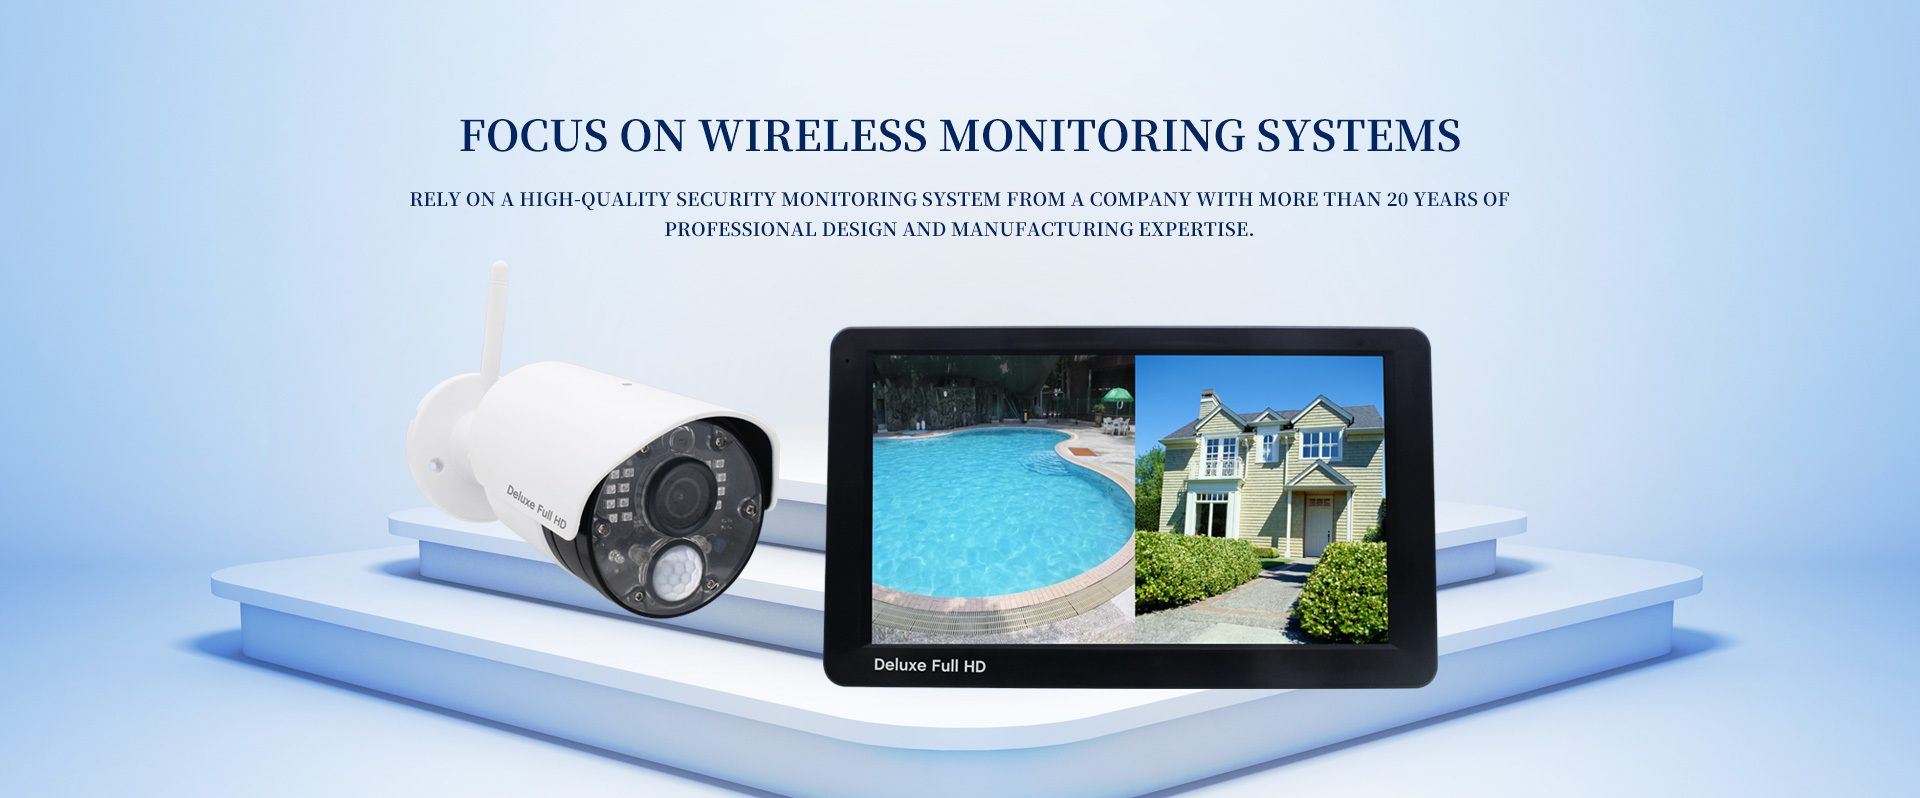 Focus on wireless monitoring systems